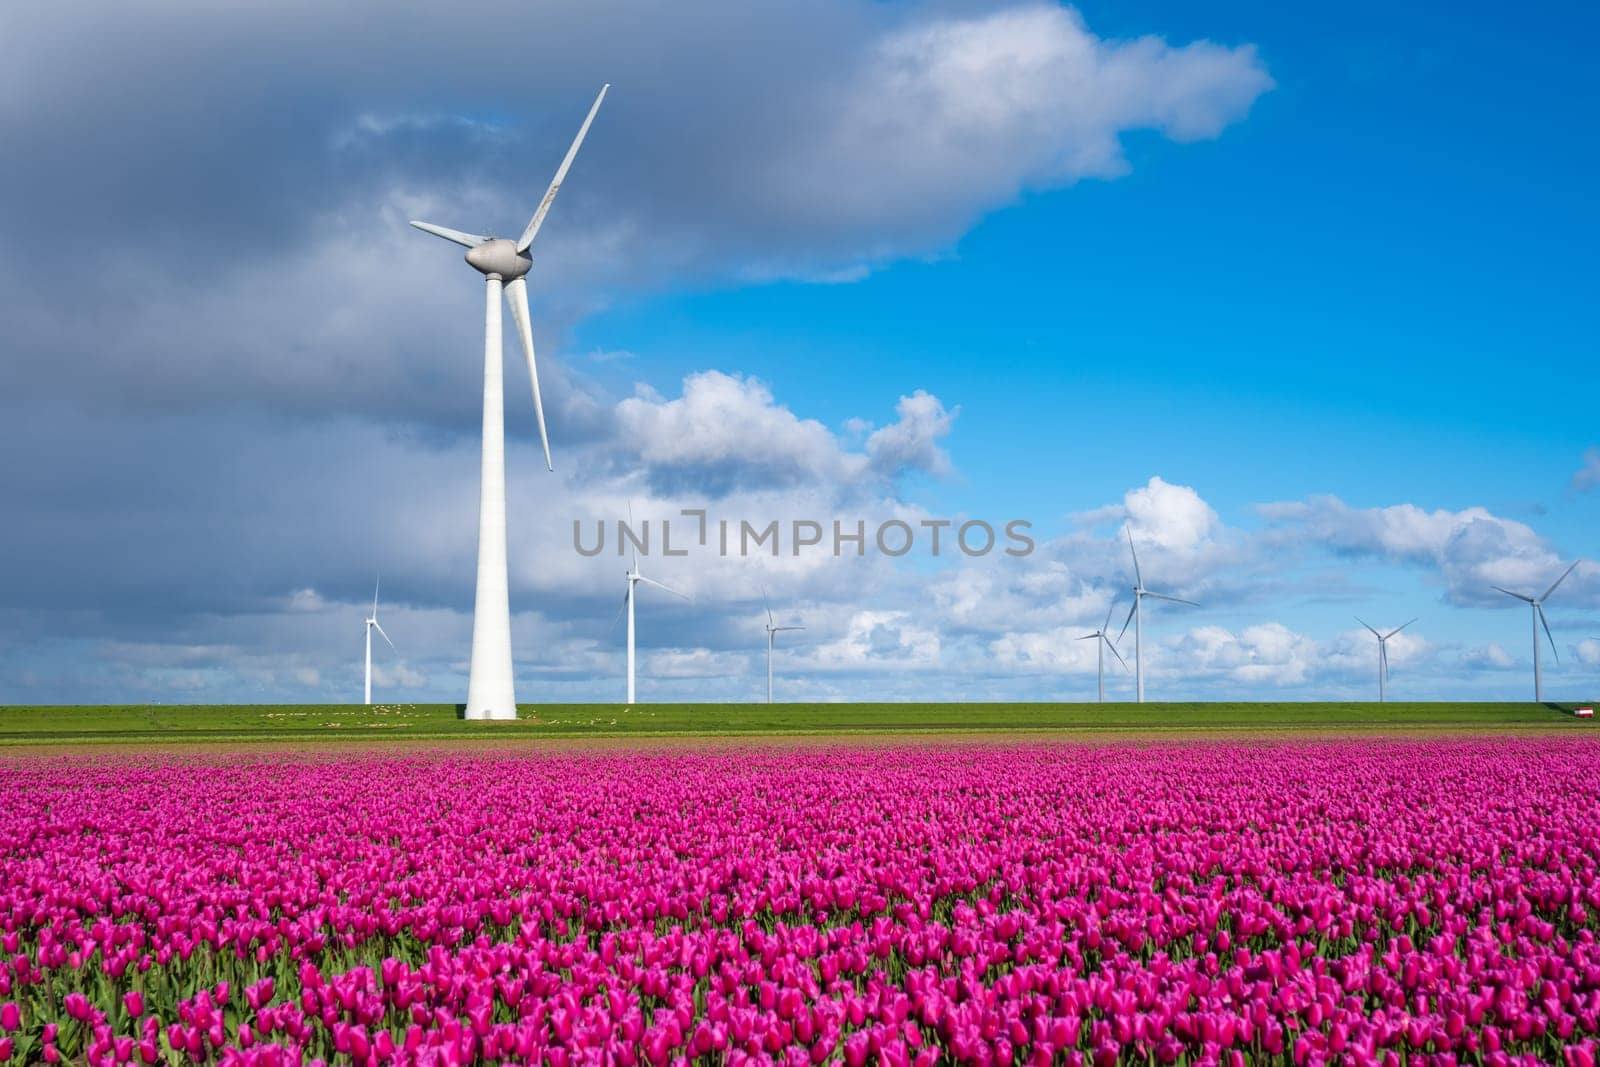 A vast field of vibrant purple flowers dances in the breeze, with towering windmills spinning gracefully in the background amidst the Dutch countryside in spring by fokkebok